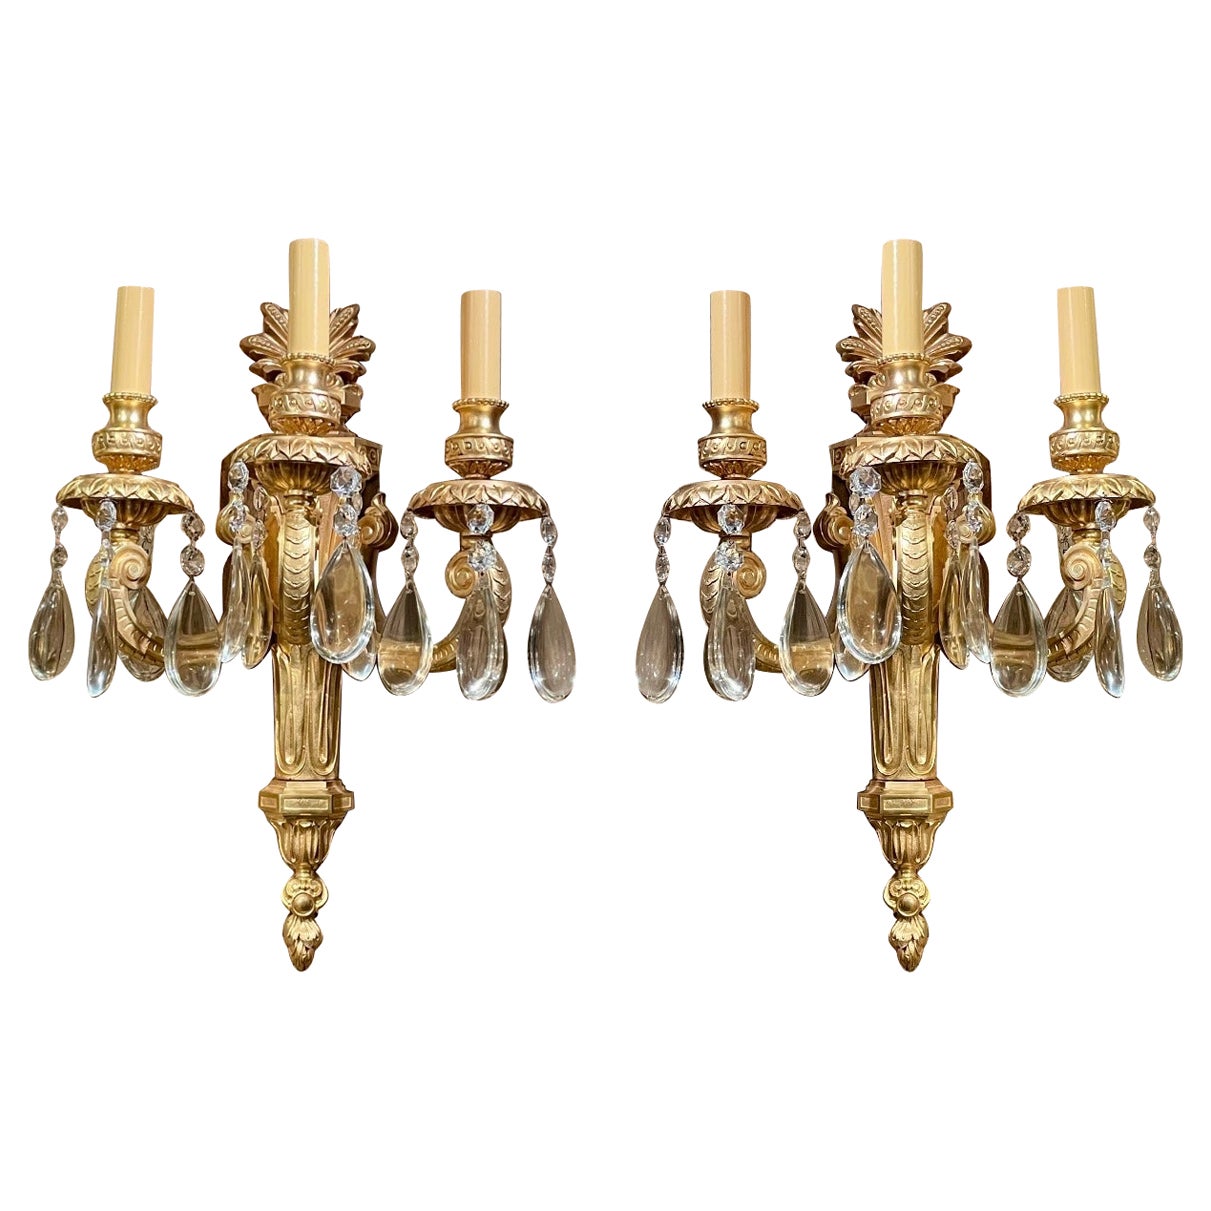 Pair of Antique French Regency Ormolu Chateau Lights / Sconces, Circa 1840-1850. For Sale